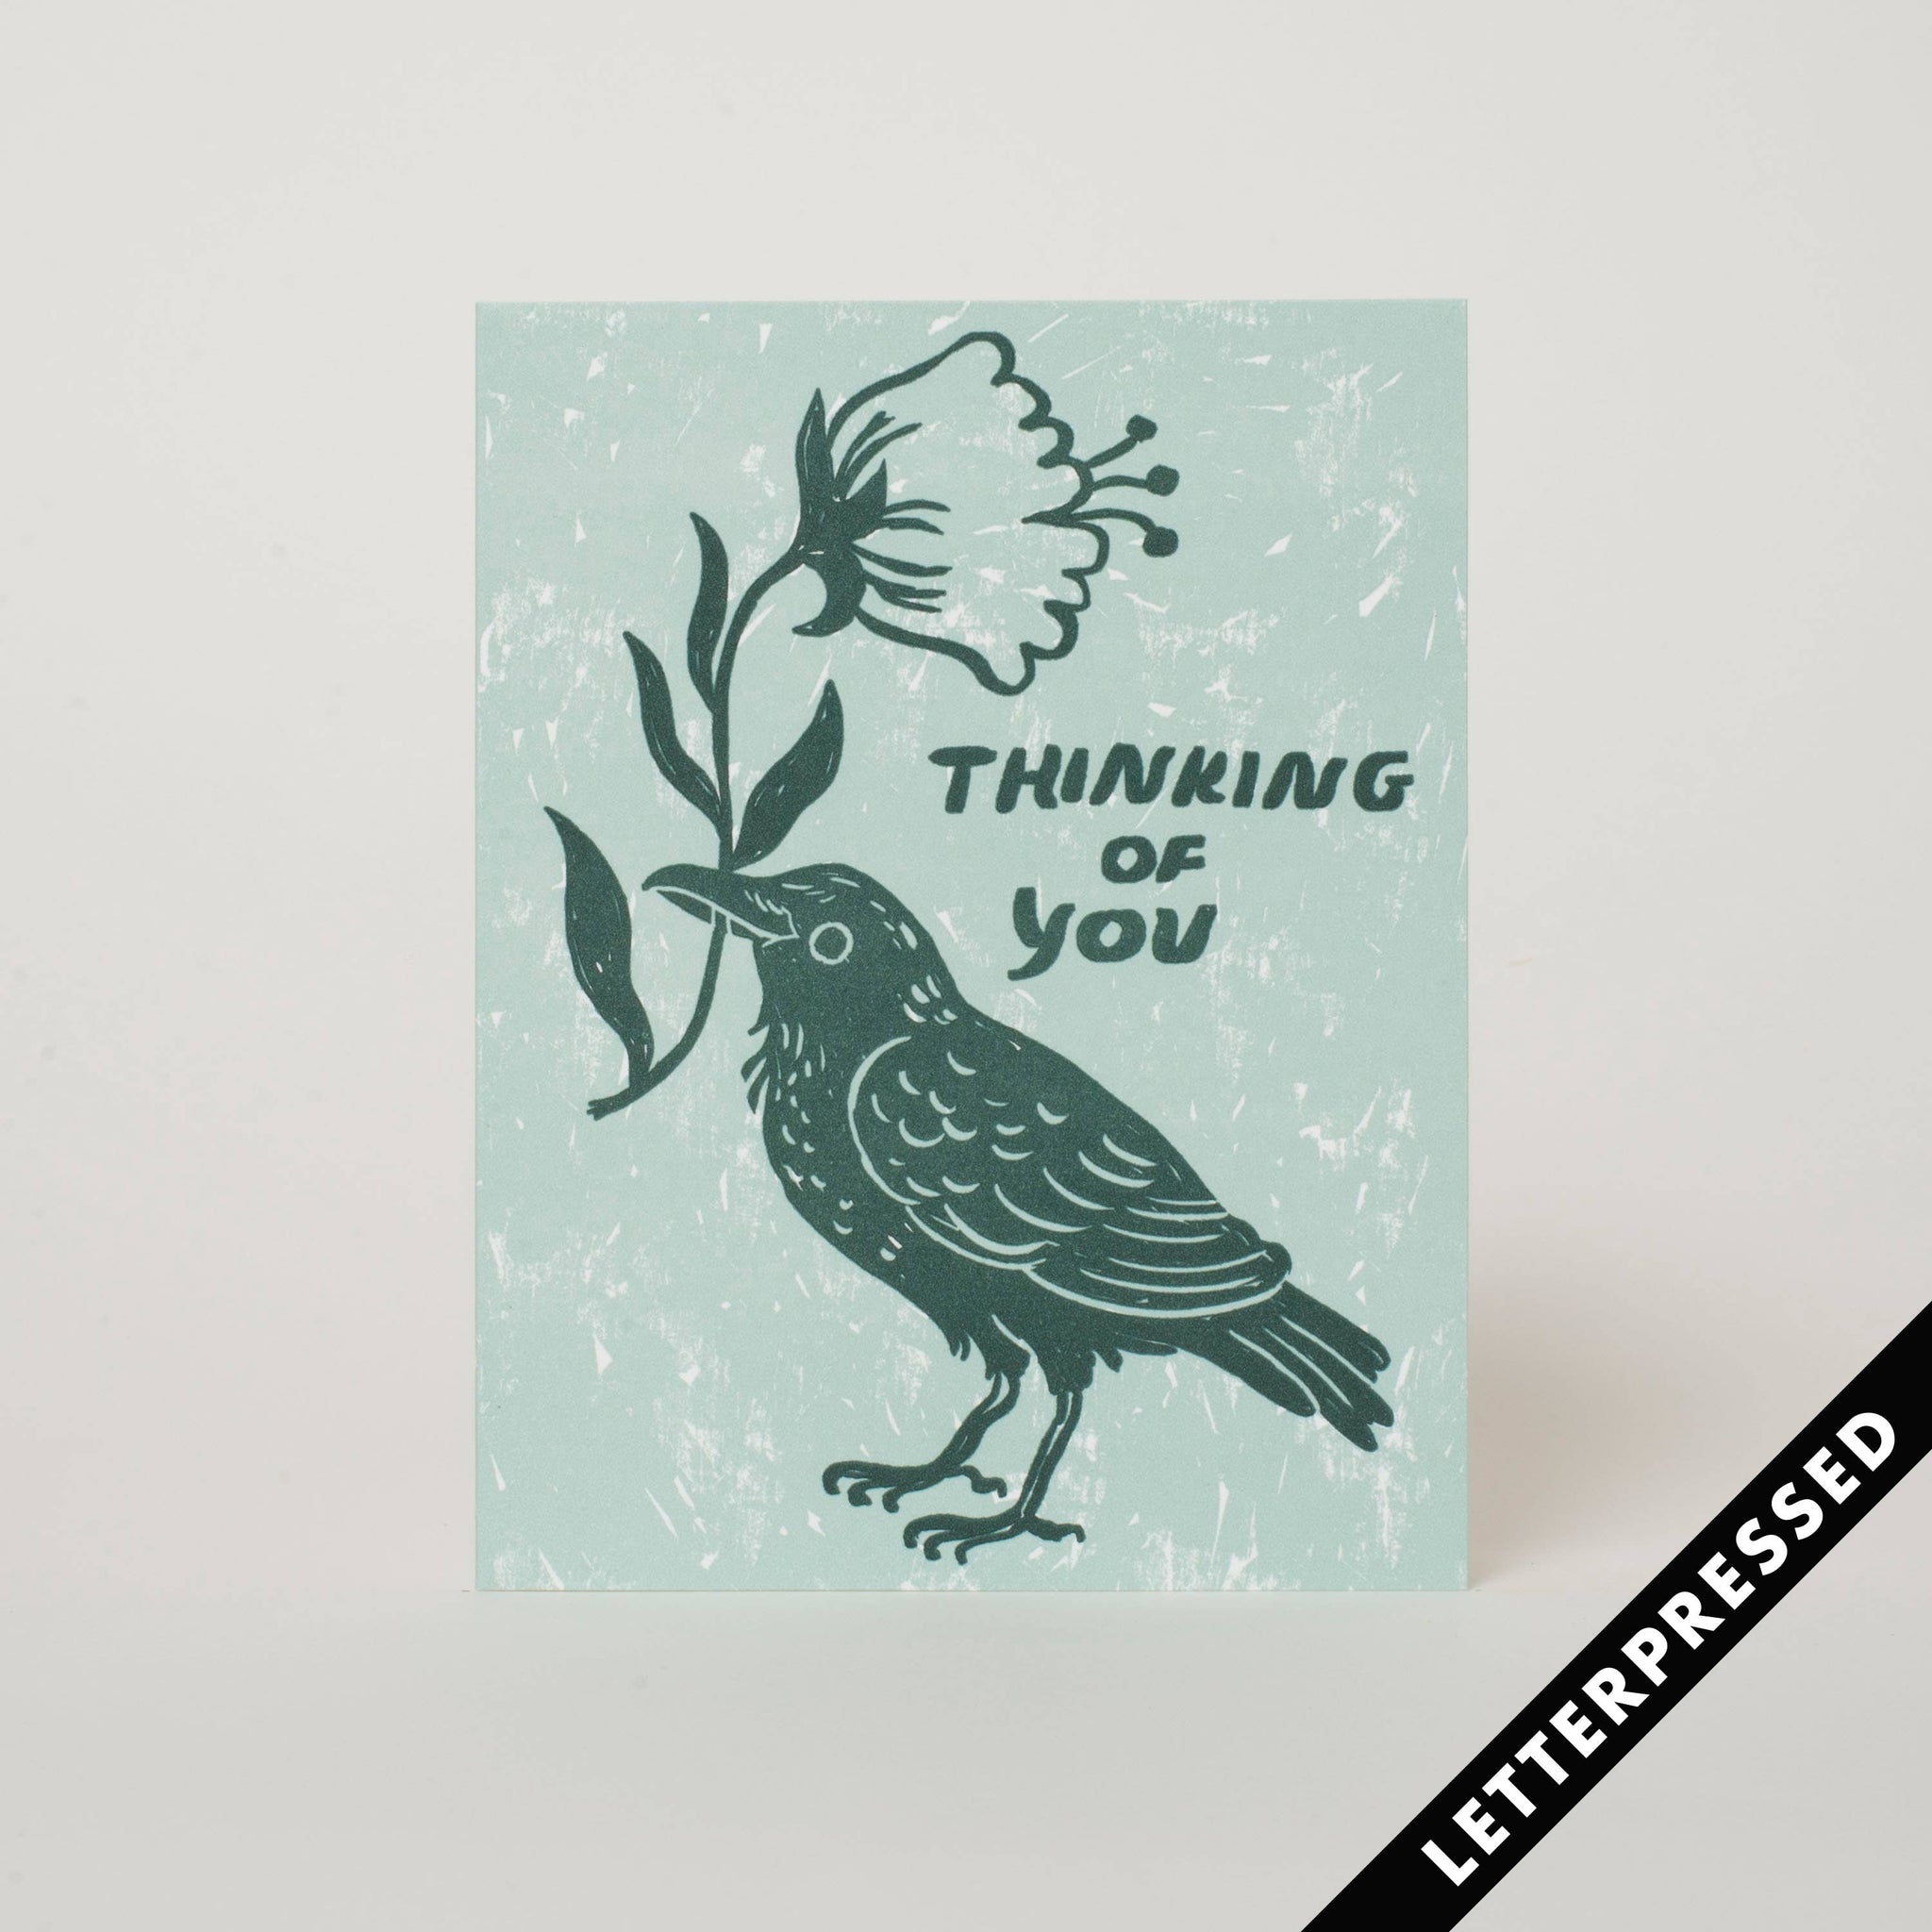 PHOEBE WAHL -- Thinking of You Crow